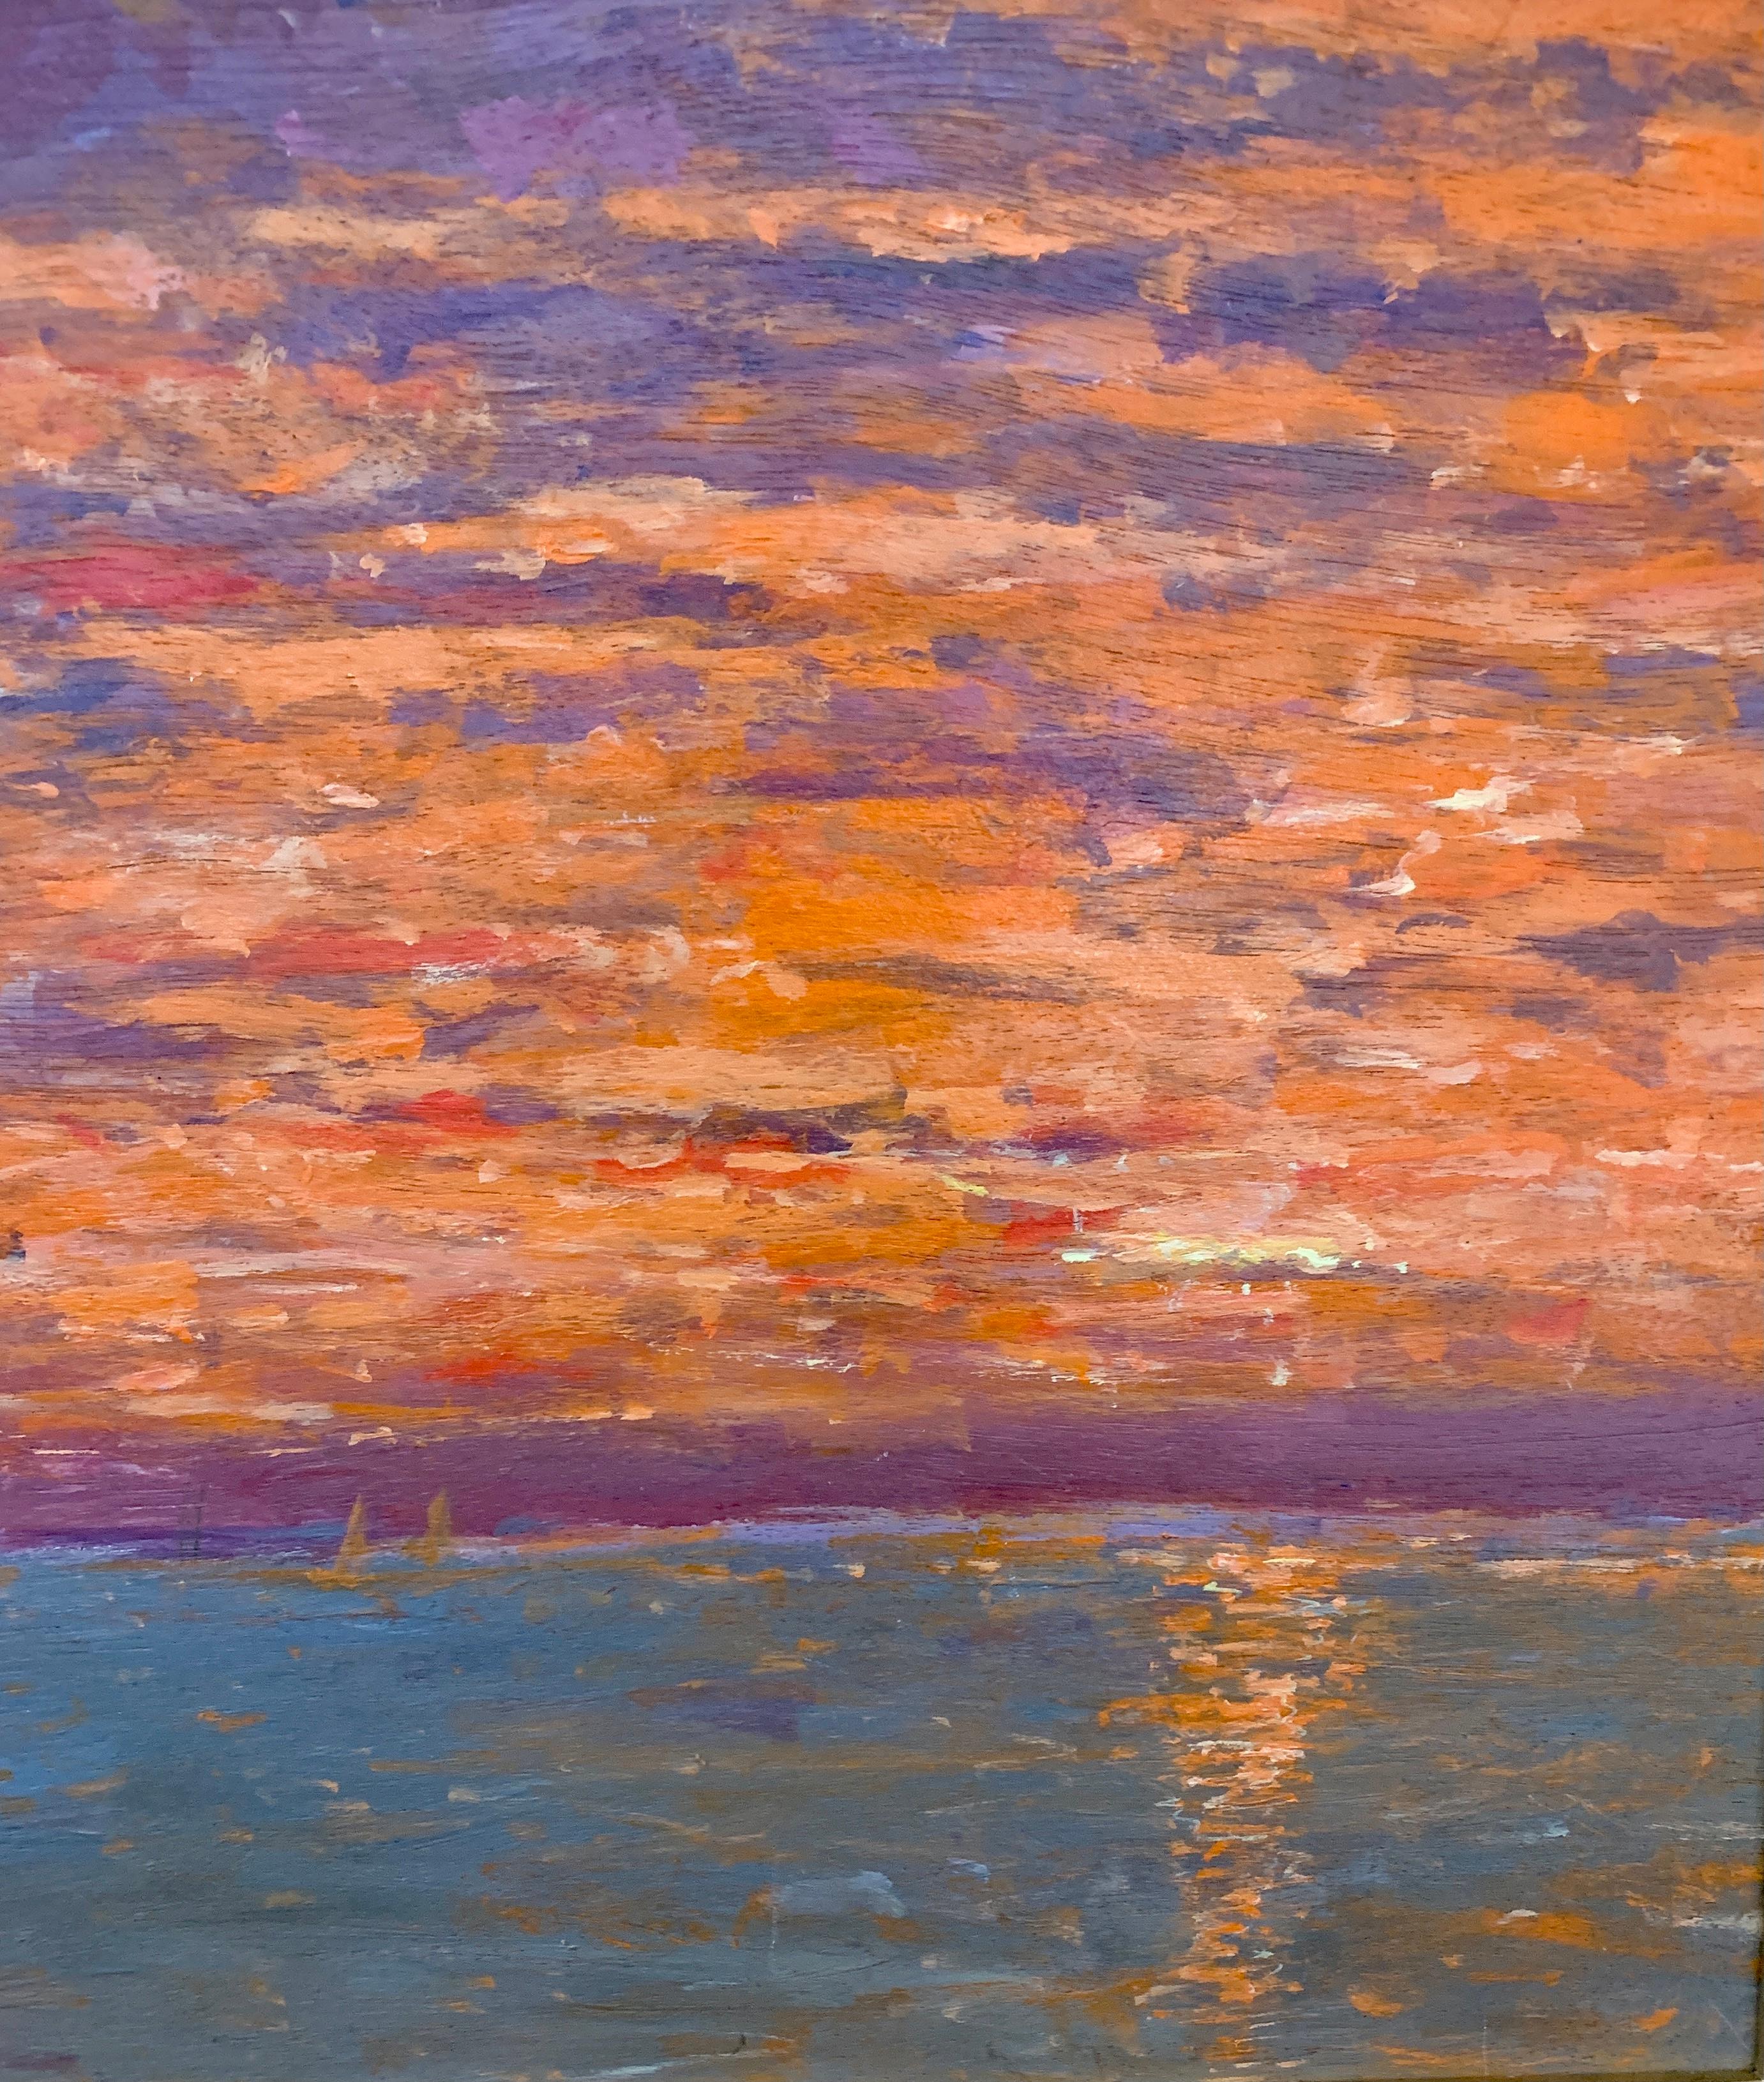 Summer 2019 Sunset in Nantucket with landscape near Madaket - Painting by Charles Bertie Hall